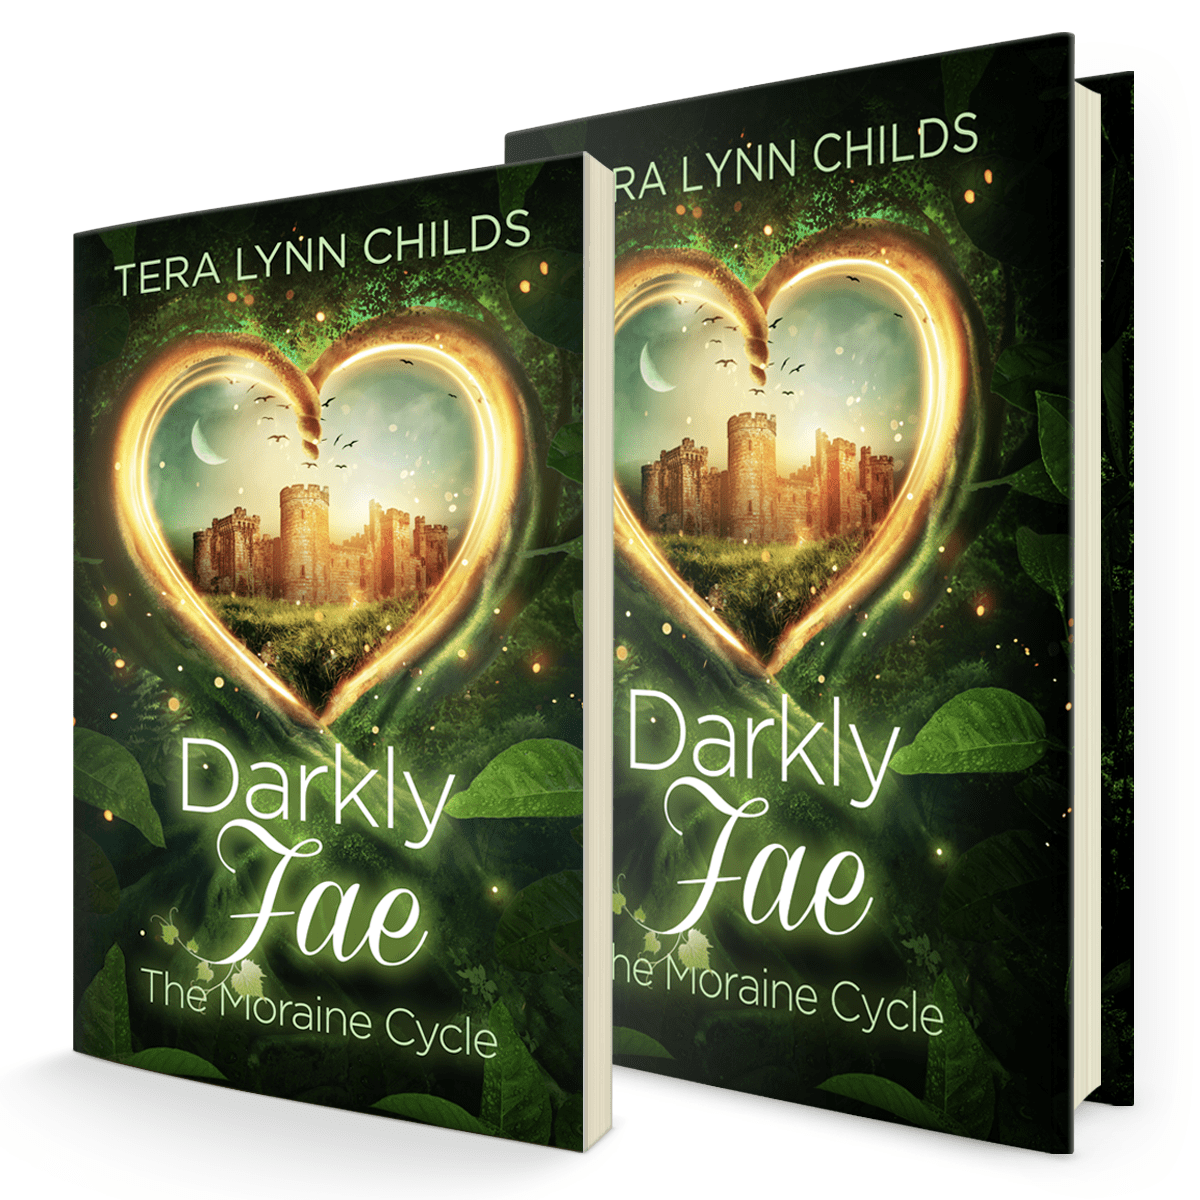 3D mockup of Darkly Fae: The Moraine Cycle by Tera Lynn Childs